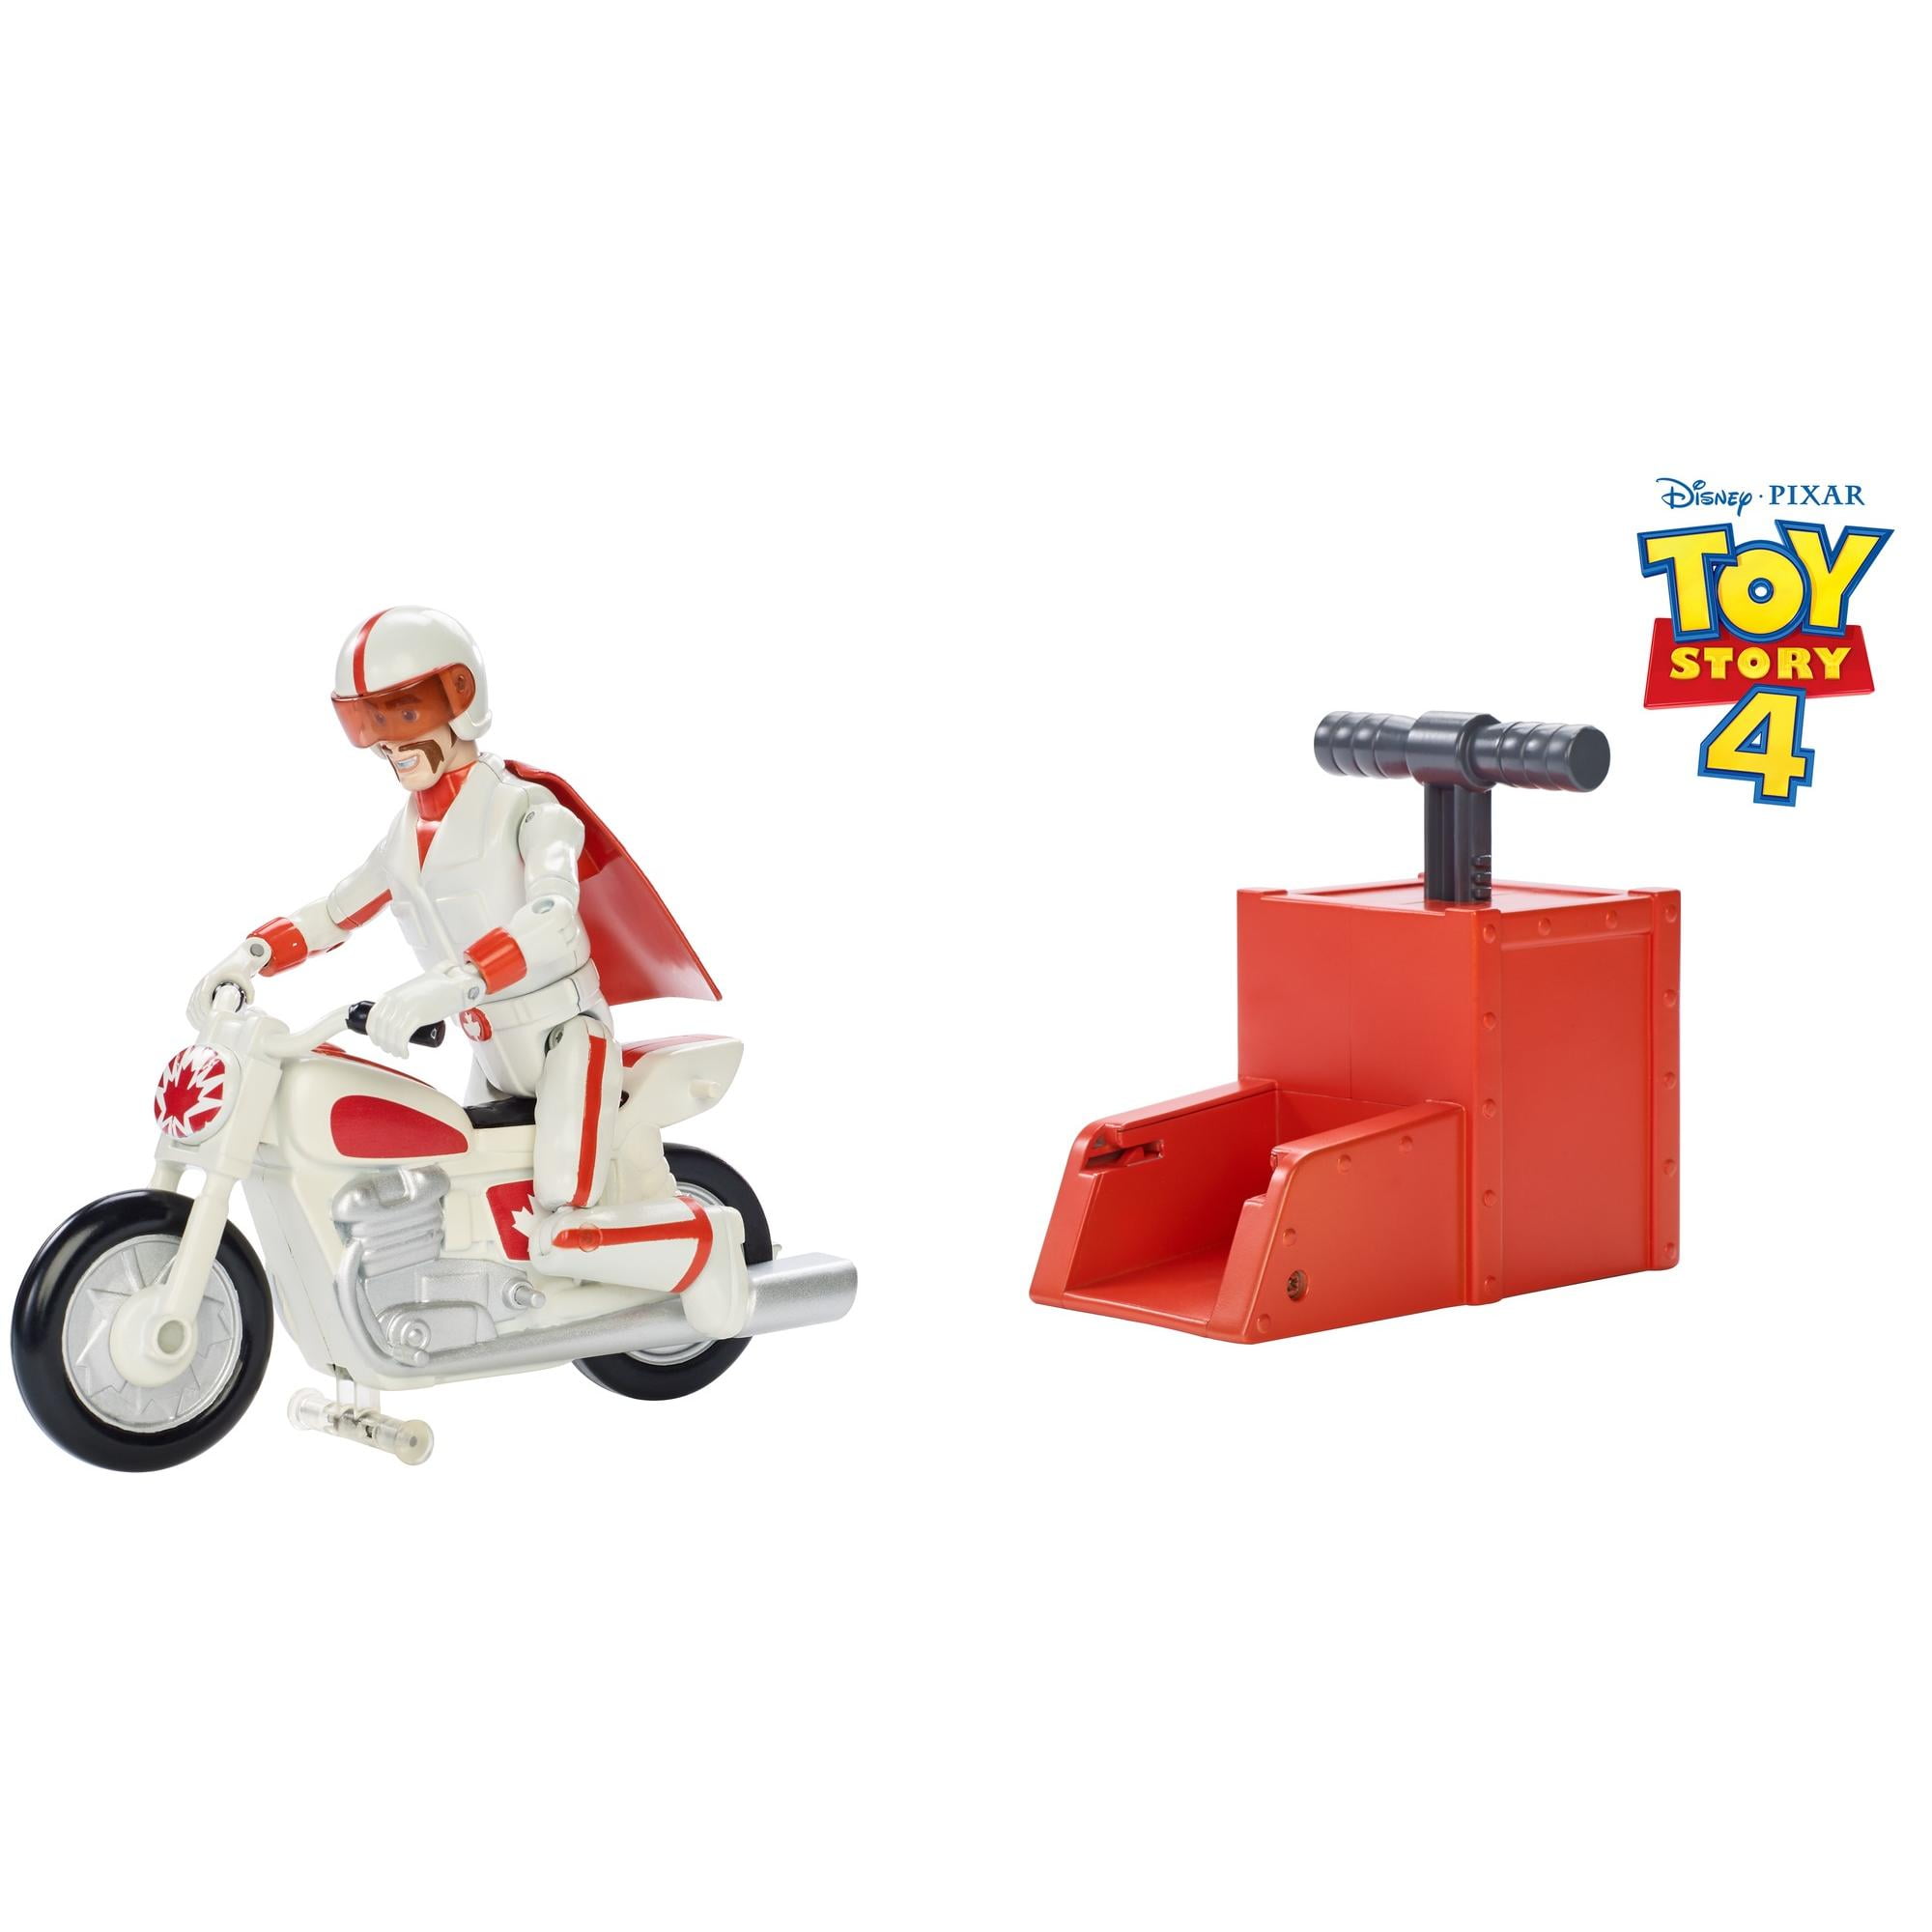 toy story 4 duke caboom action figure